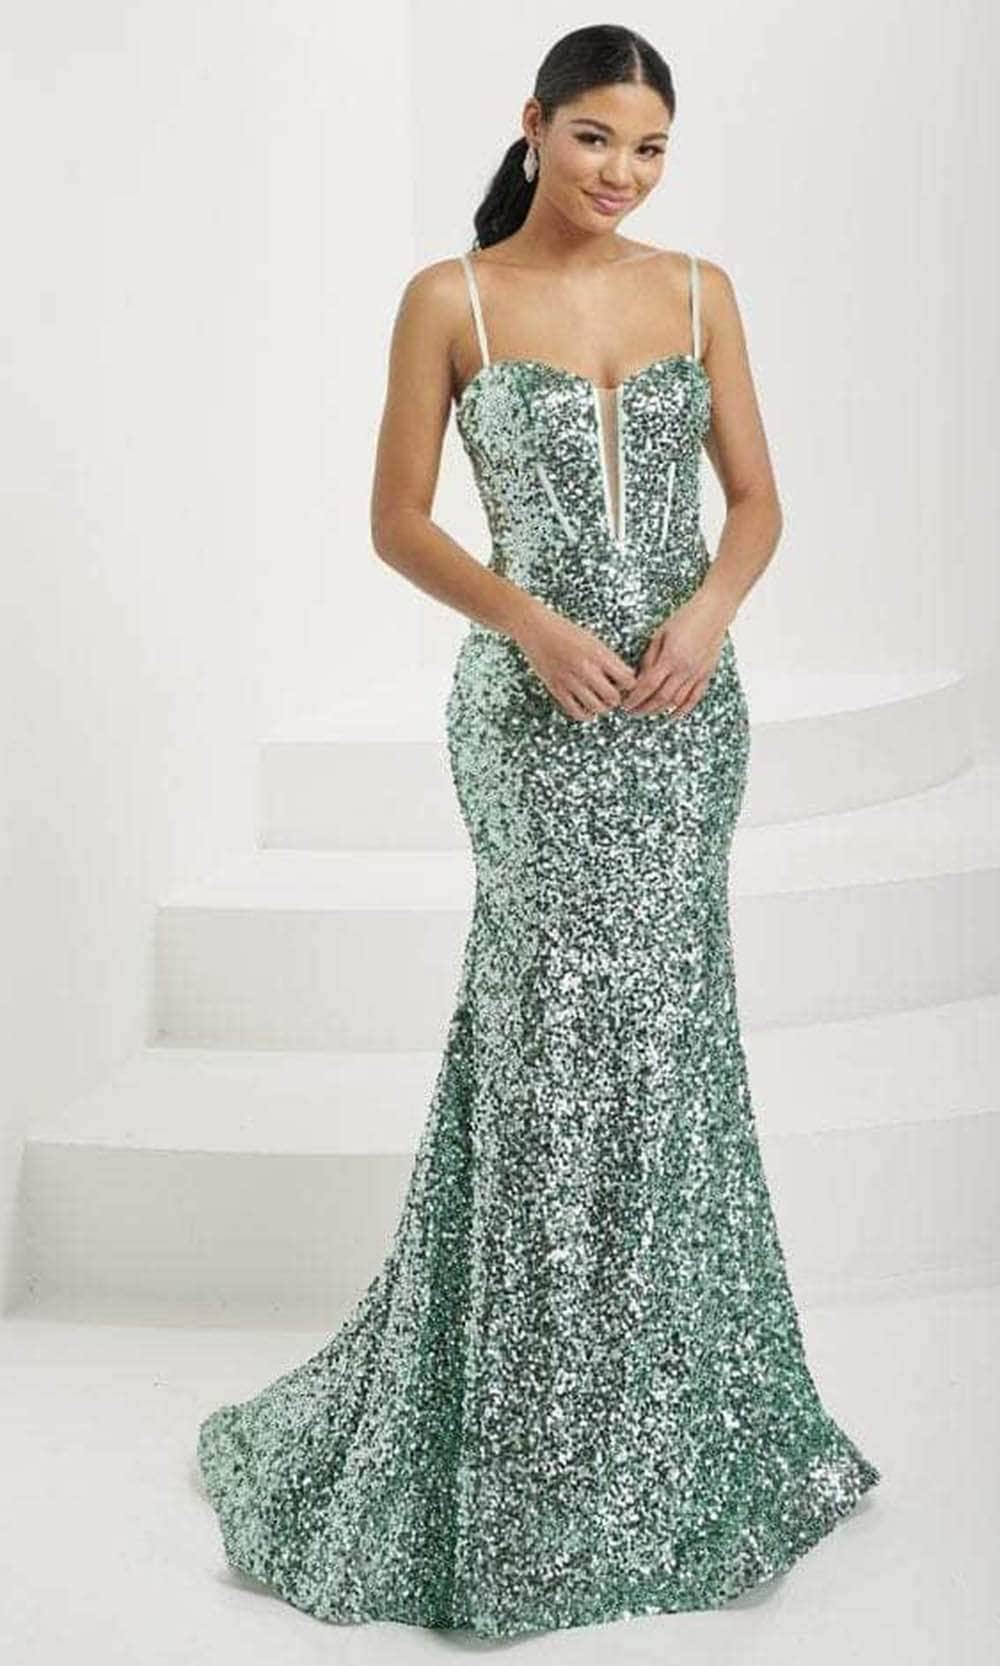 Tiffany Designs 16081 - Plunging Sweetheart Sequin Prom Gown Evening Dresses 0 / Sage